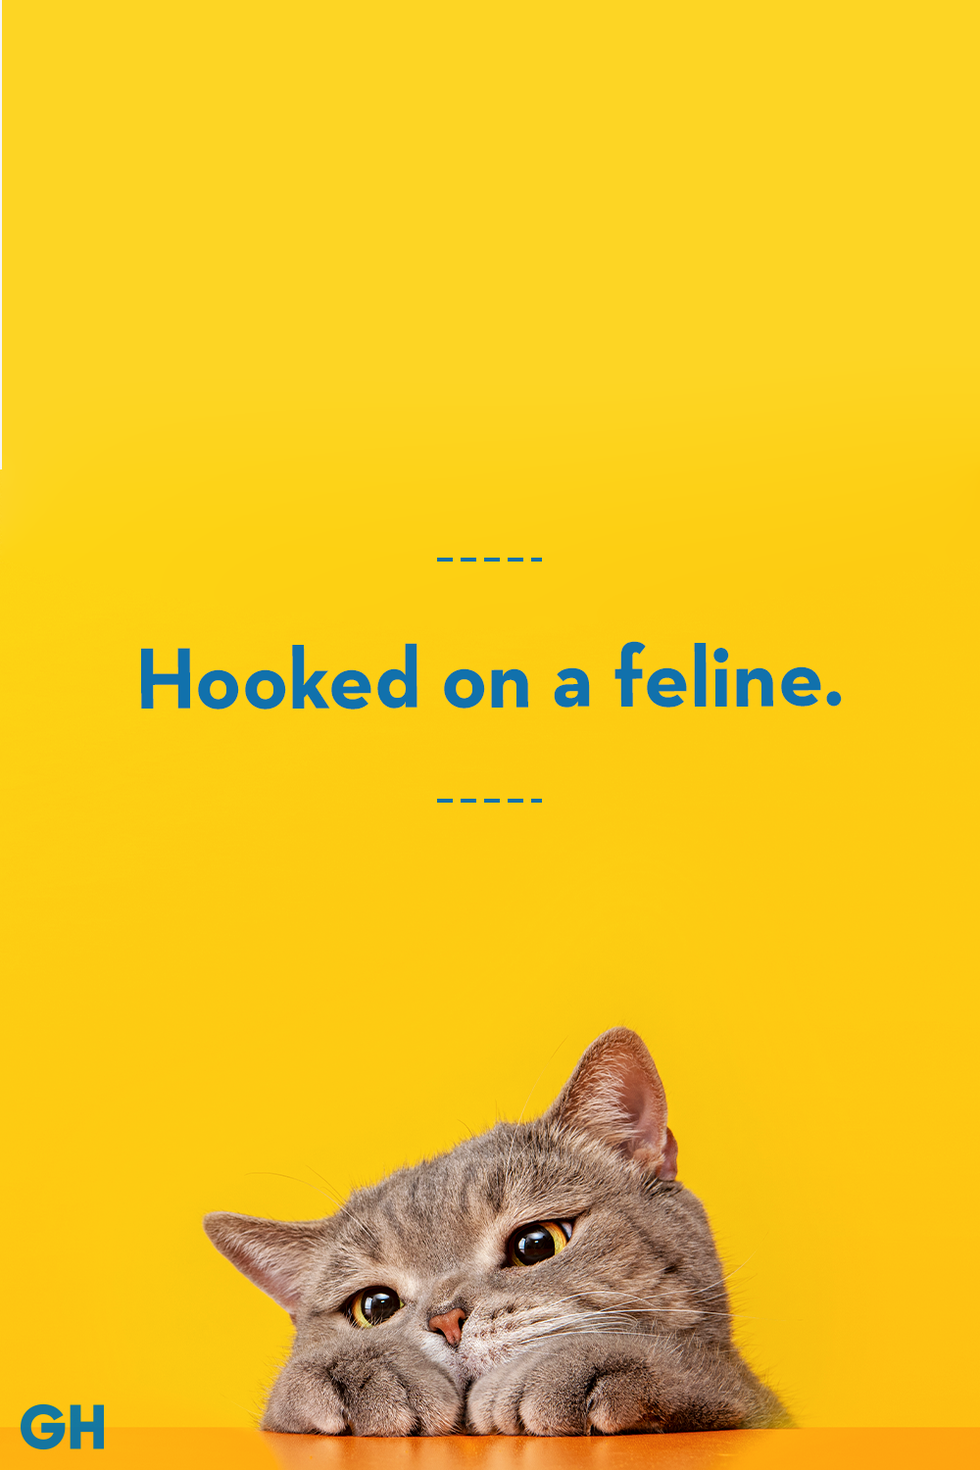 yellow cat quote card